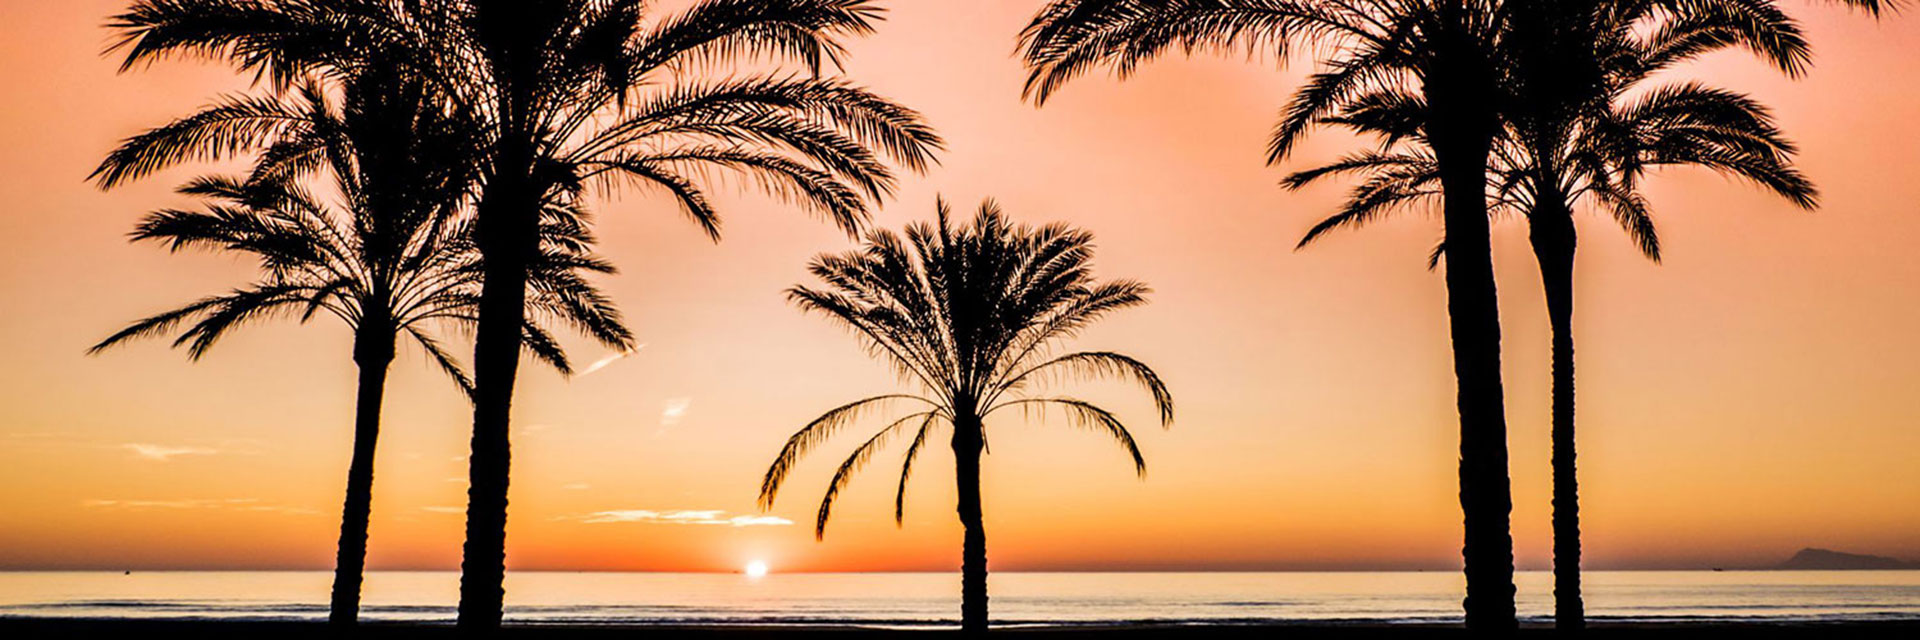 in the sun holidays banner 5 sunset promenade palm trees